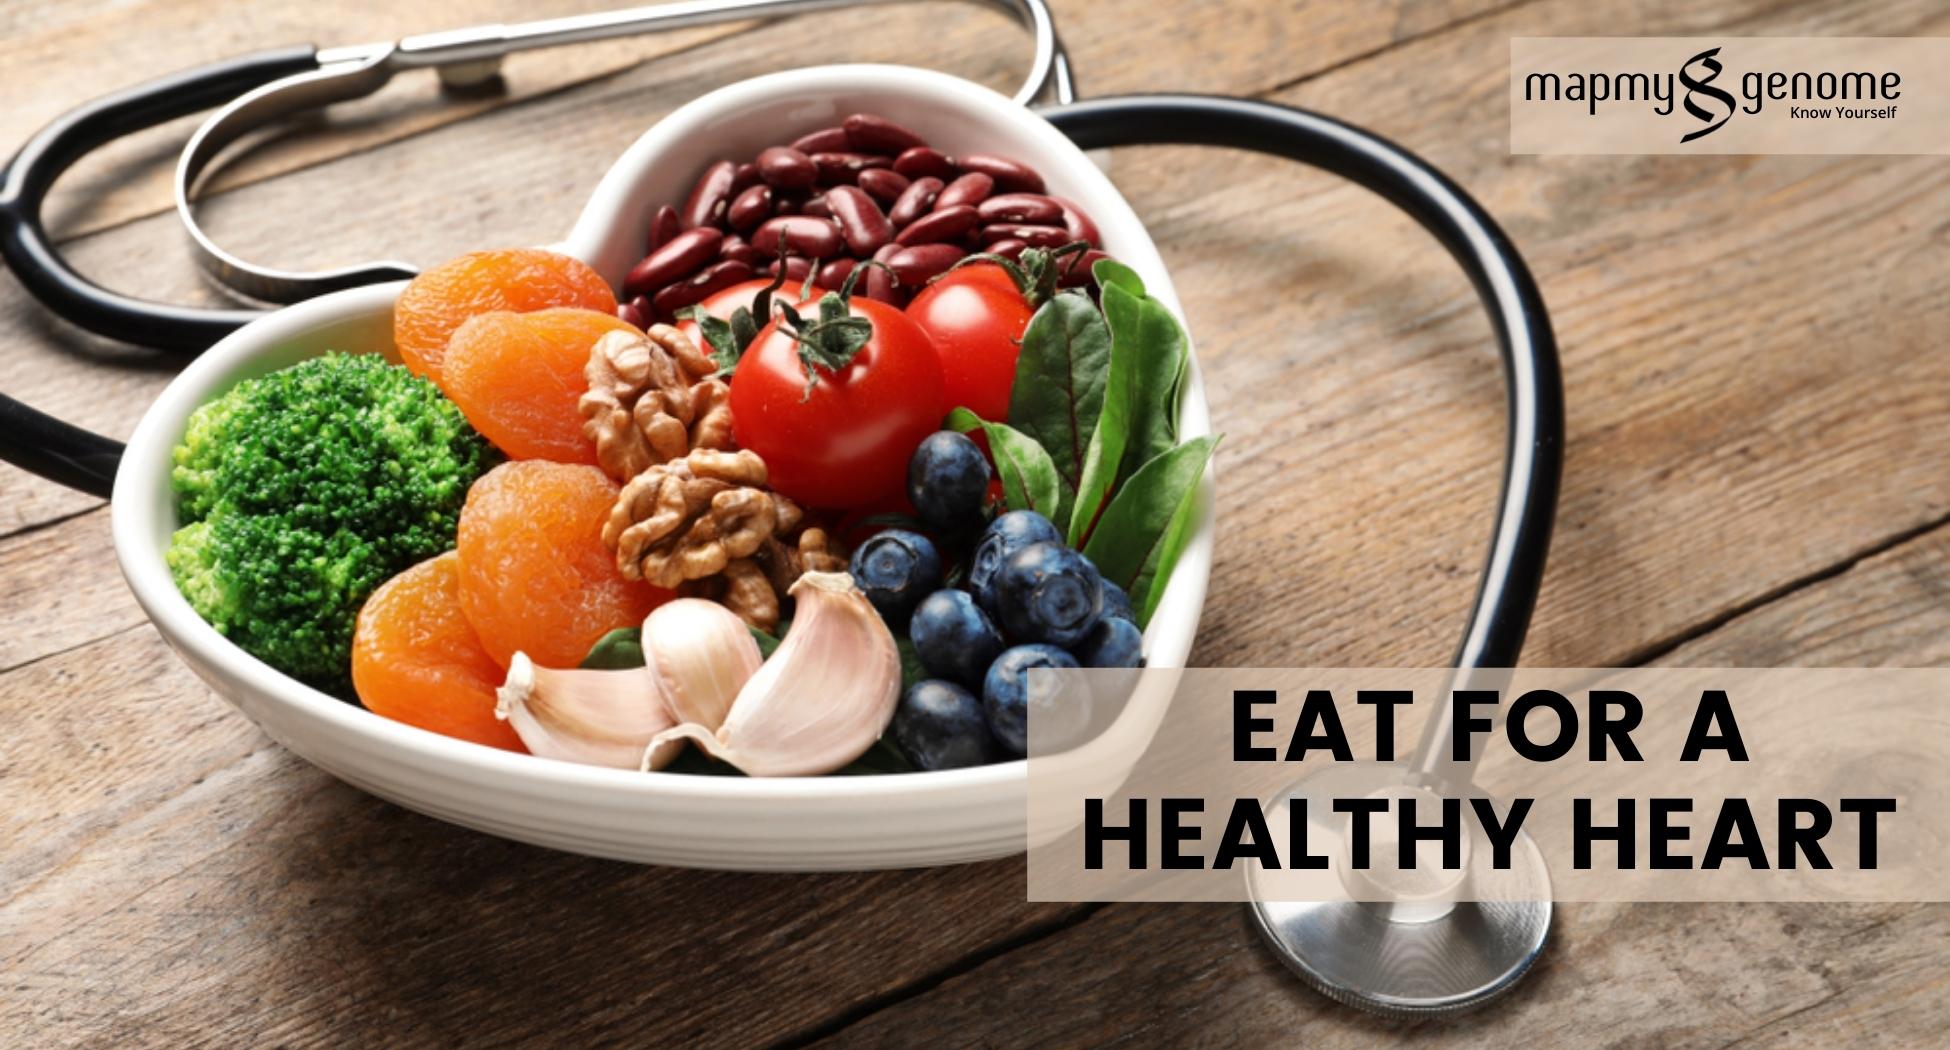 Eat for a healthy heart: